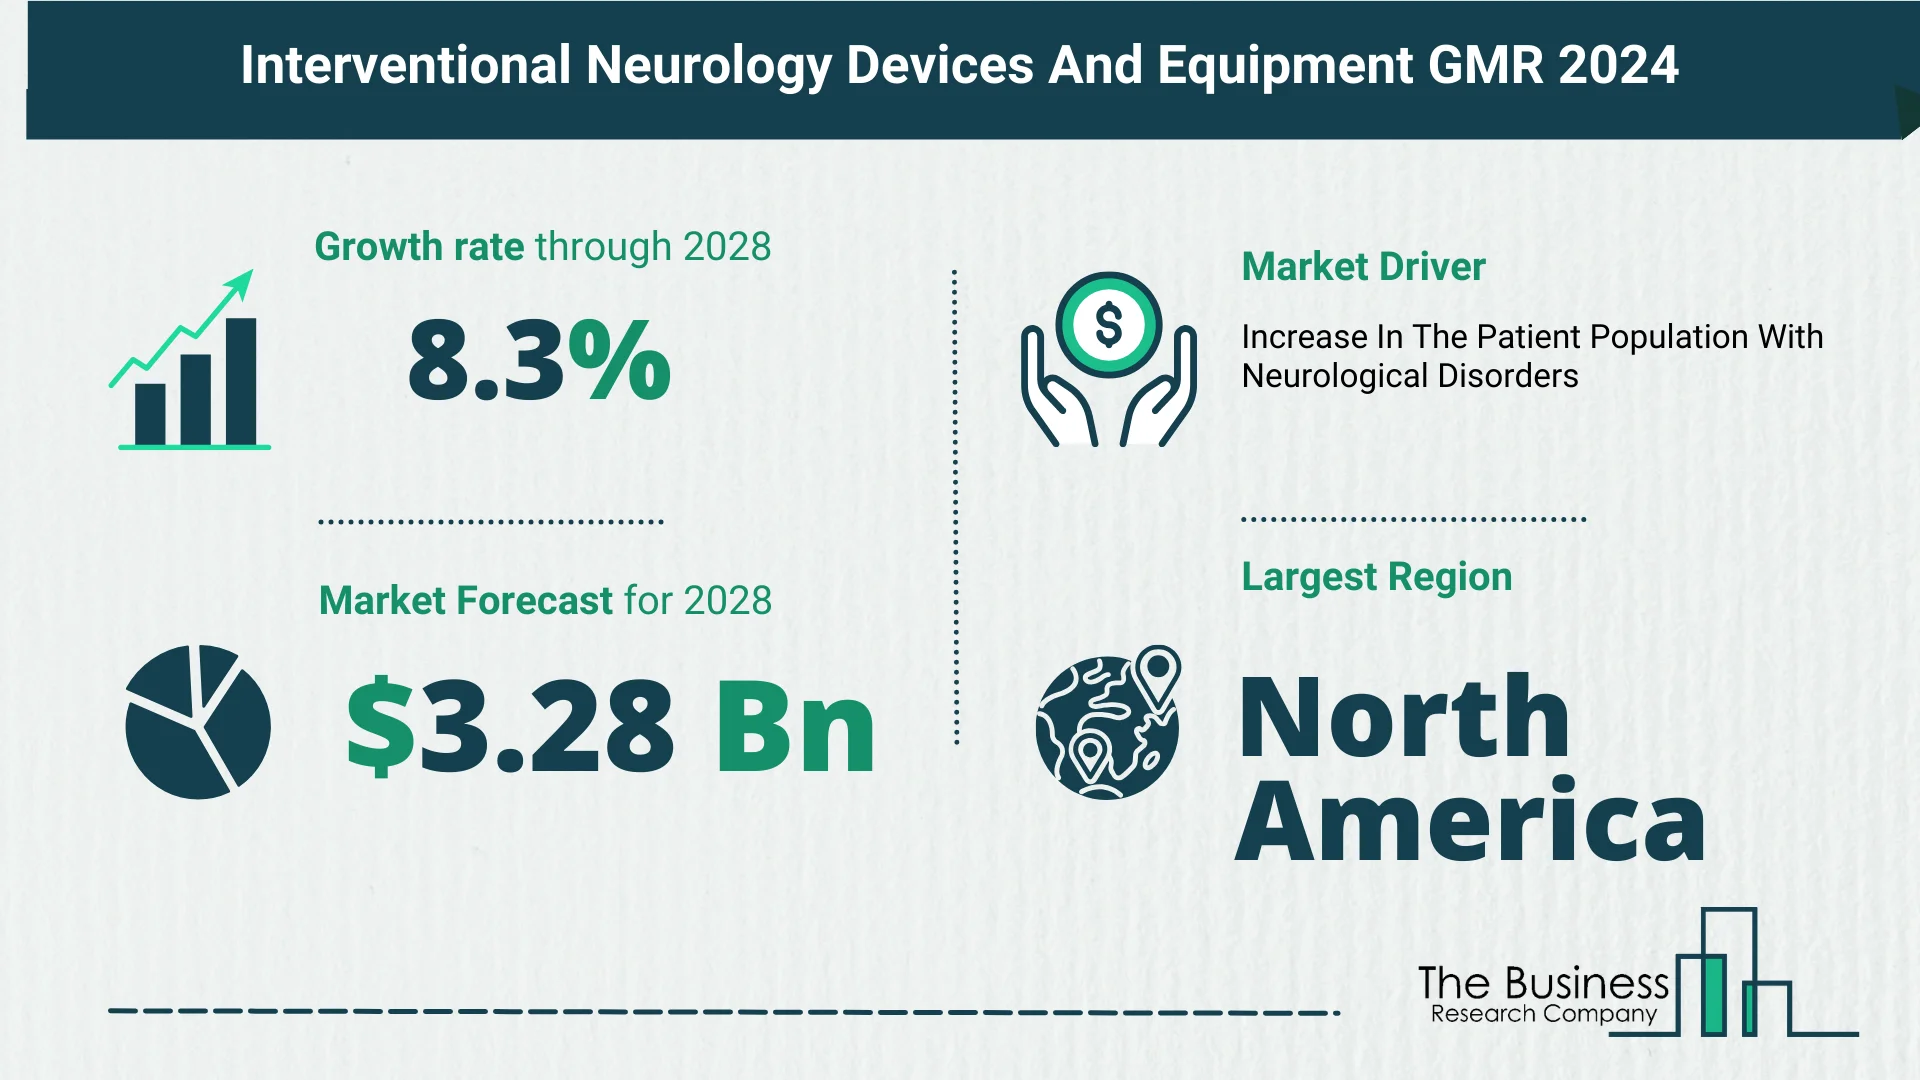 How Is The Interventional Neurology Devices And Equipment Market Expected To Grow Through 2024-2033